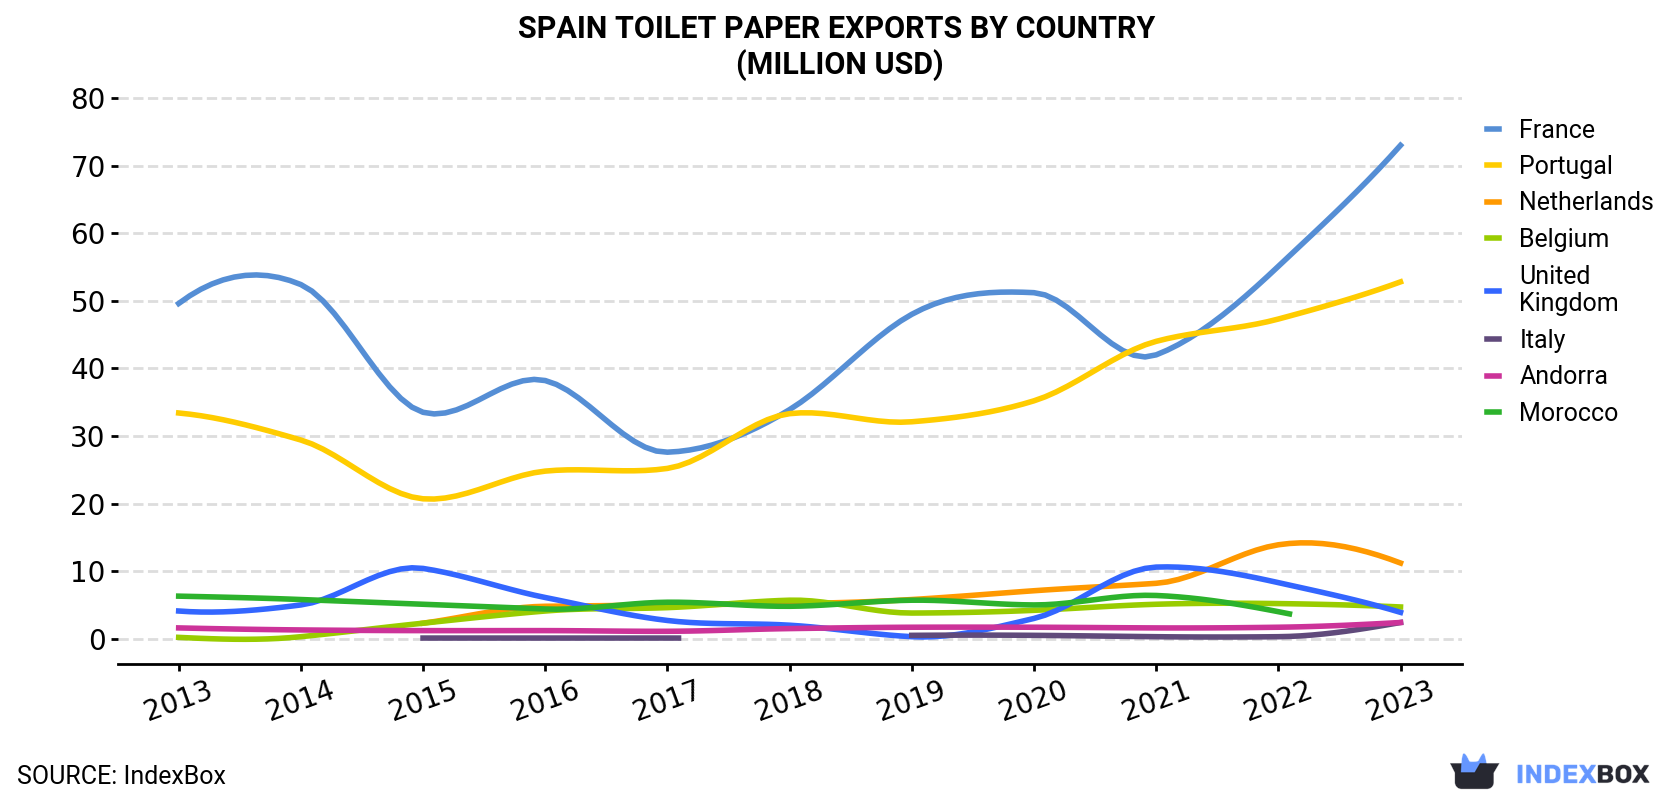 Spain Toilet Paper Exports By Country (Million USD)